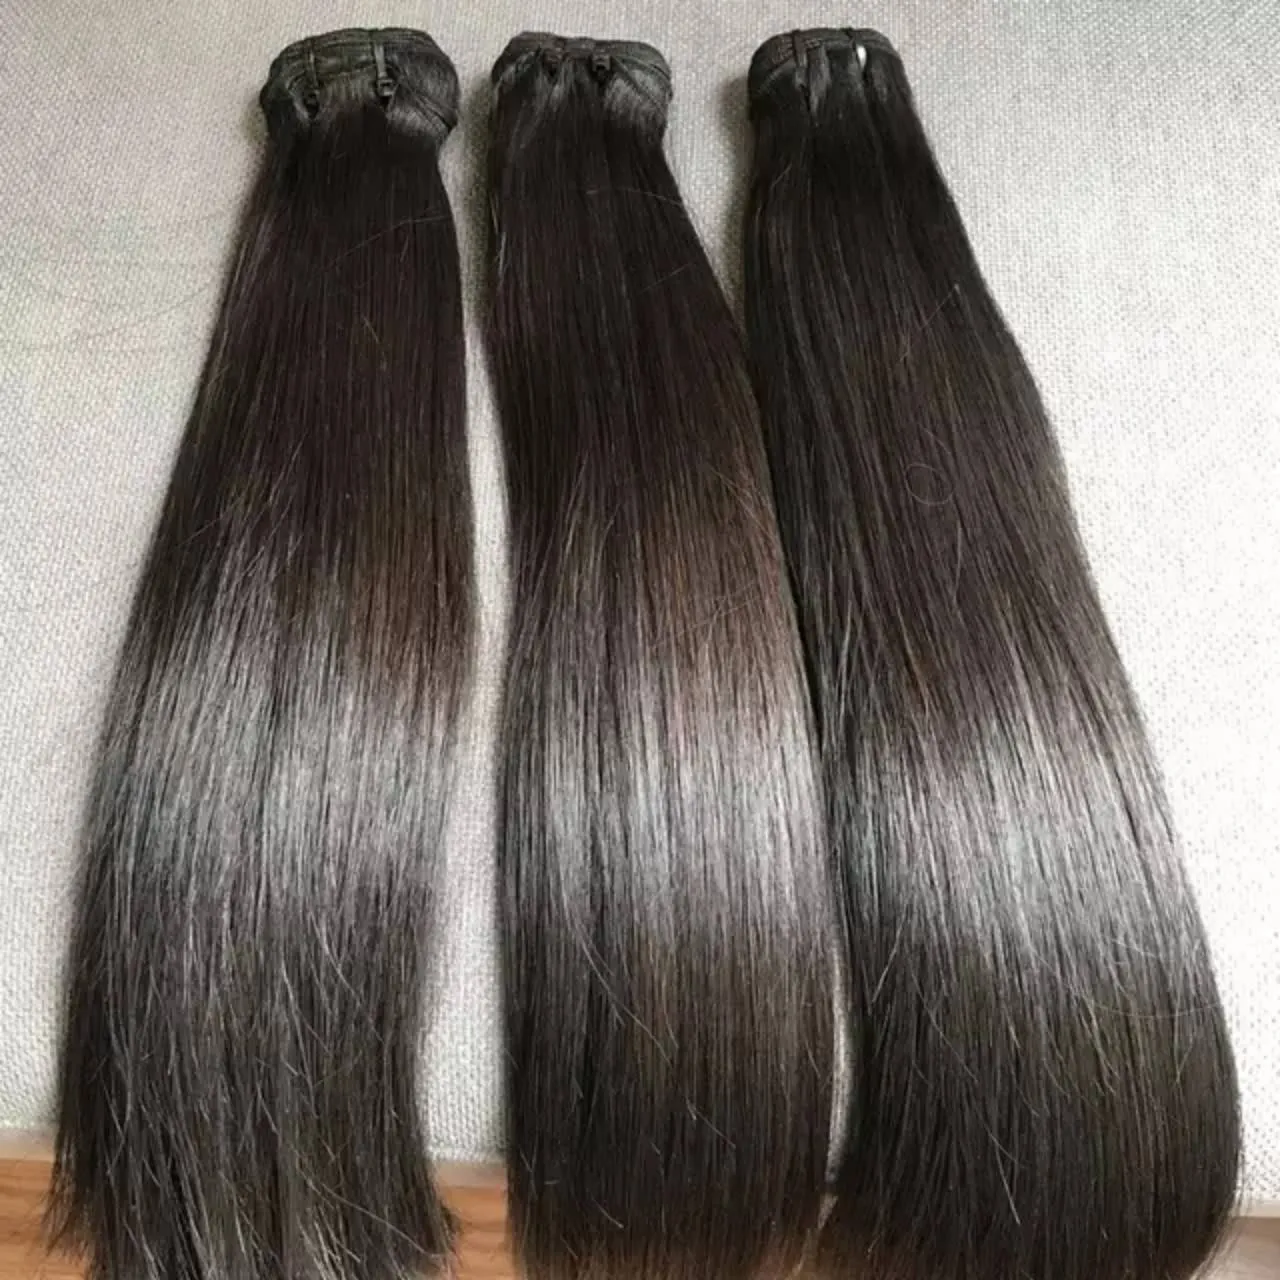 Raw Virgin Indian Remy Silky Straight Hair Weave,Raw Virgin Cuticle Aligned Indian Human Hair,Cuticle Aligned Hair Extension